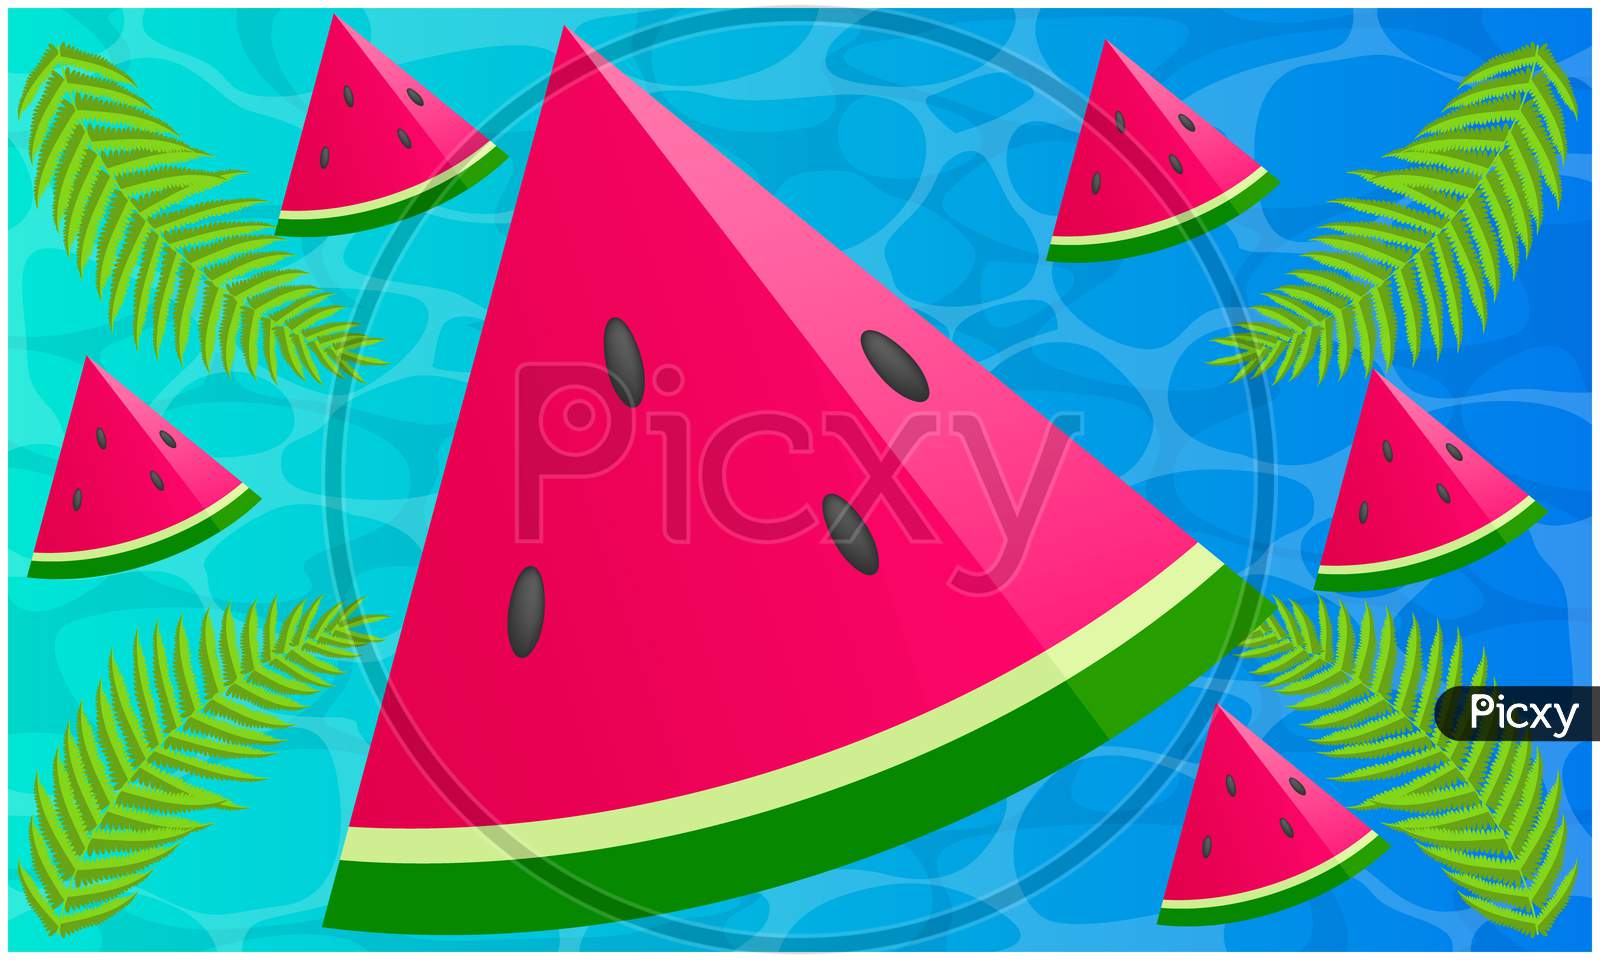 Sliced Watermelon With Leaves On Abstract Water Background